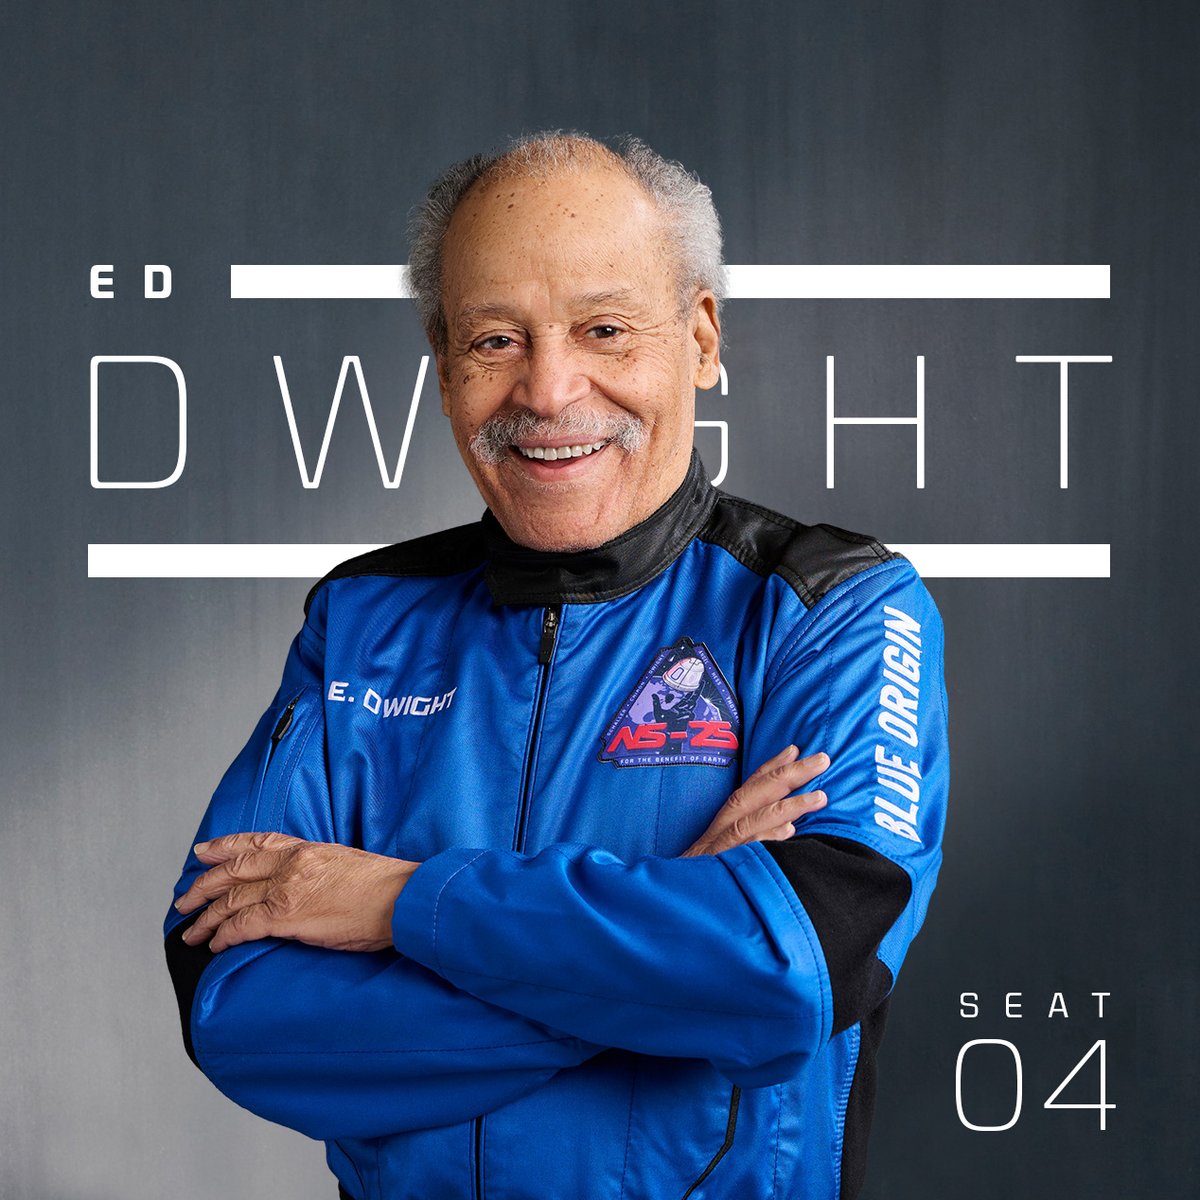 Really excited for Ed Dwight at age 90 to have this opportunity to get a small “taste” of space. Ed Dwight was selected as the nation’s first Black astronaut candidate in 1961, but was never afforded the opportunity to fly. TODAY is your day.  #GodSpeed